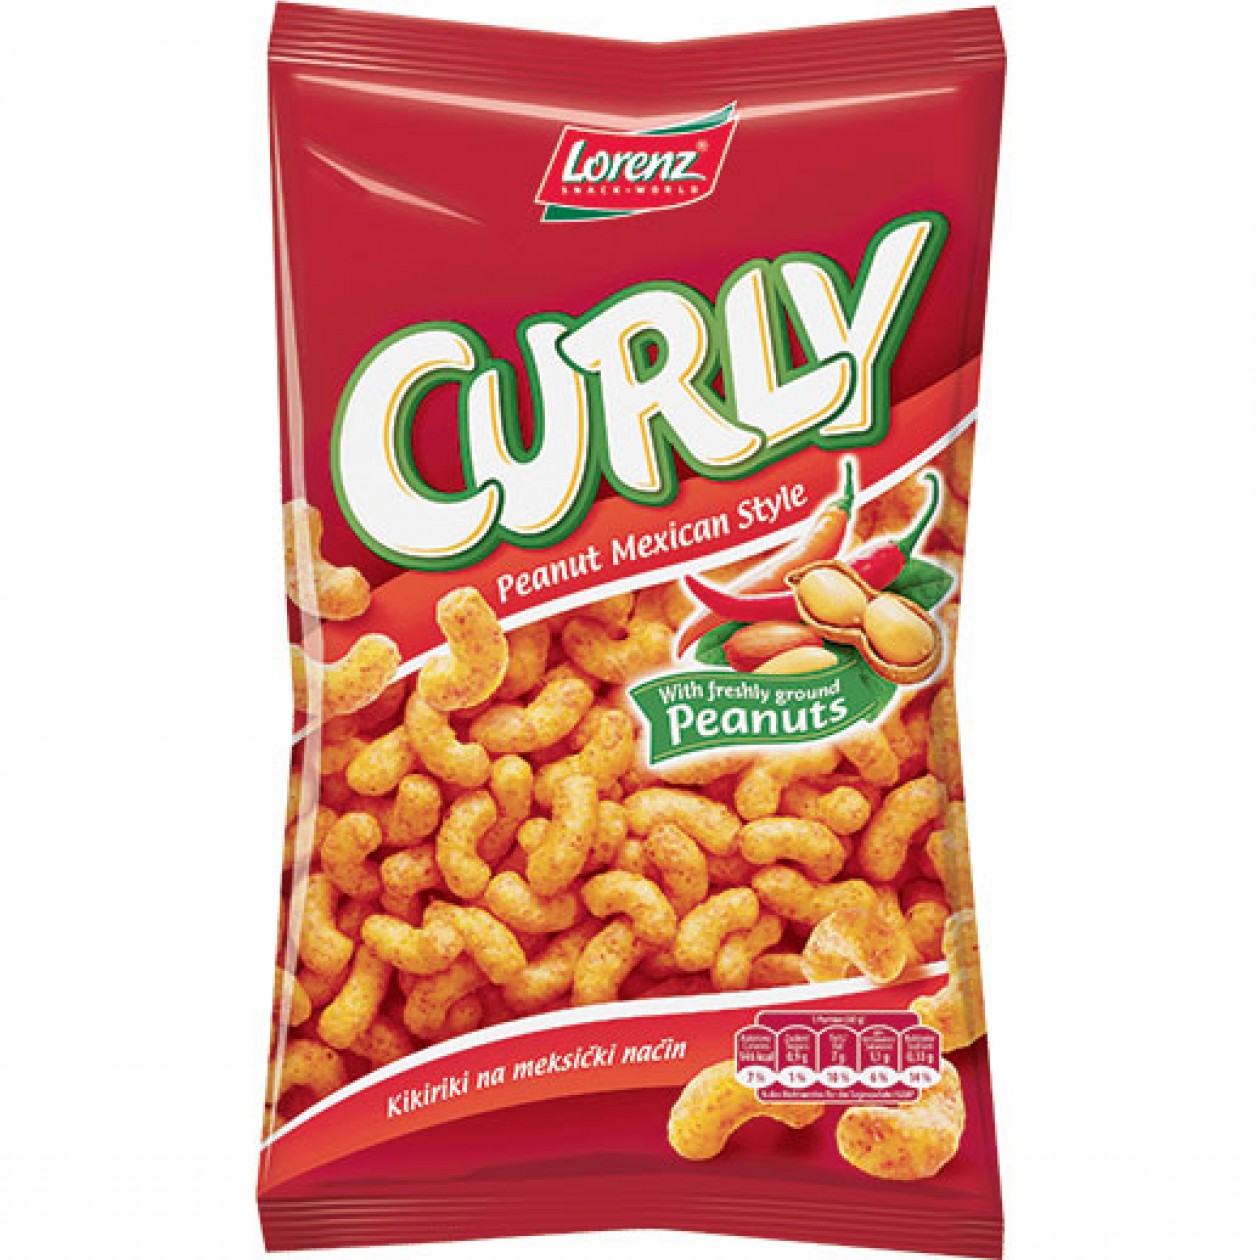 Crisps Curly Mexican Classic 12x150g